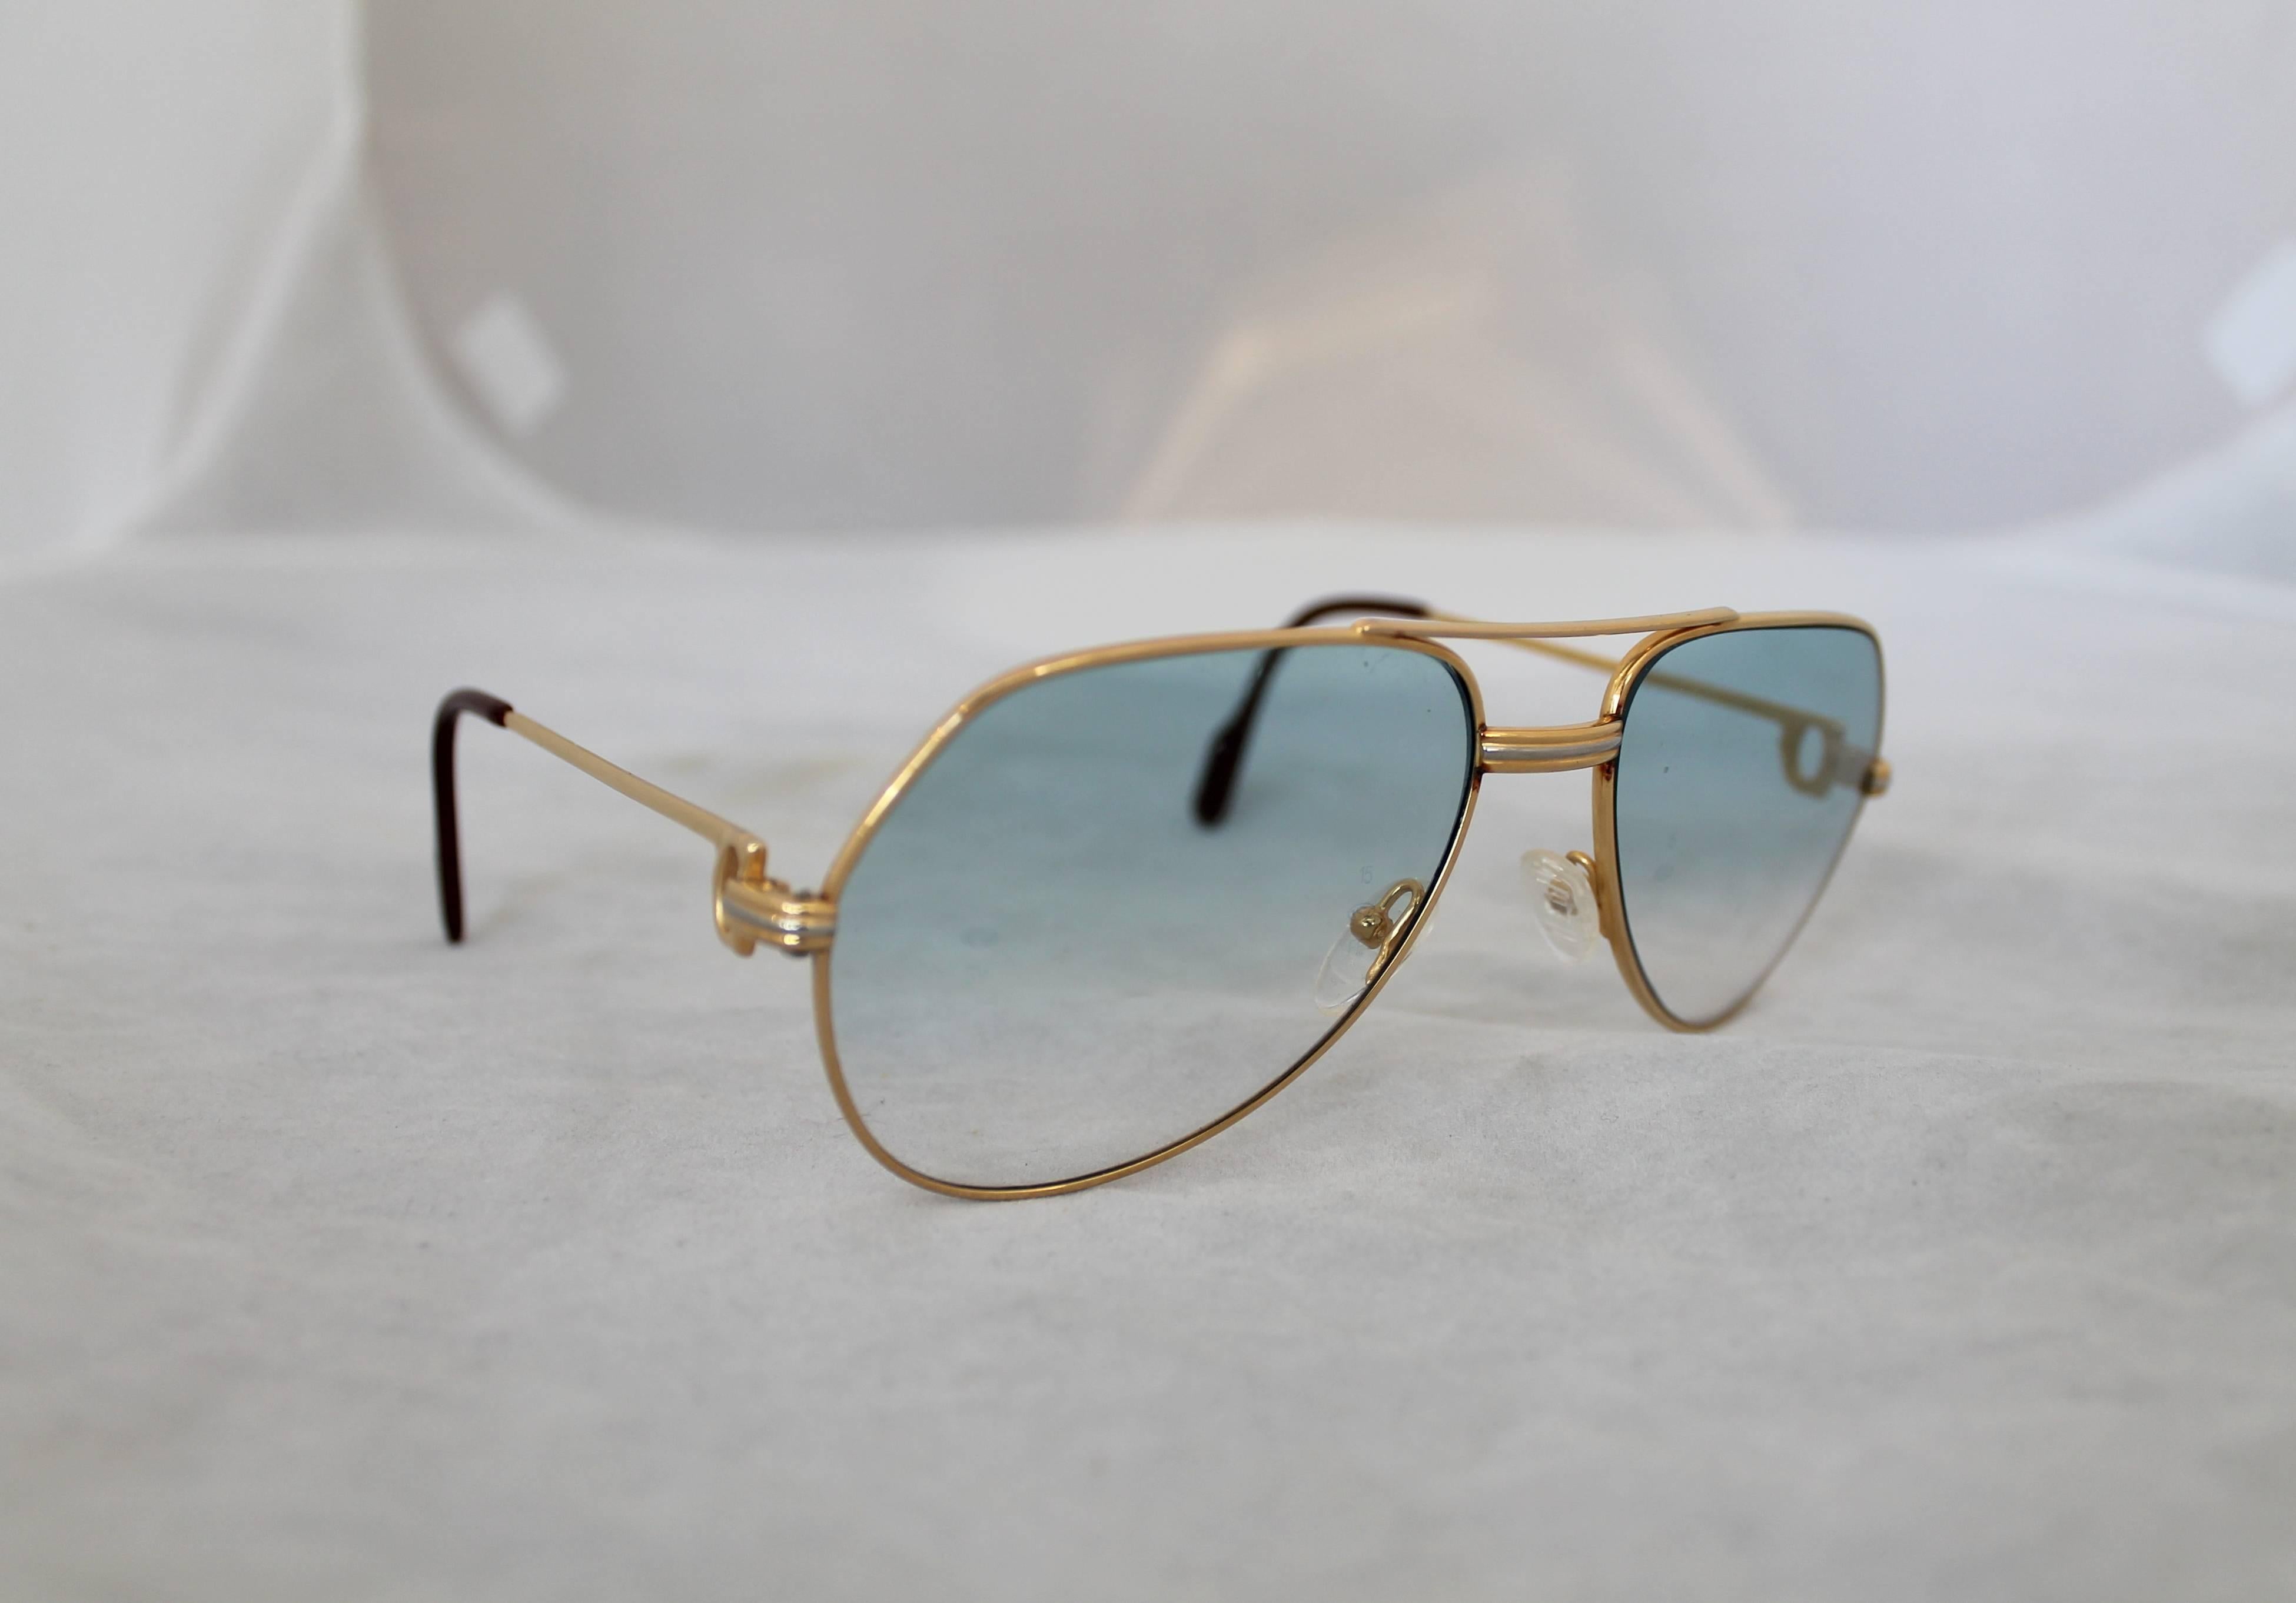 Cartier Gold Rimmed Aviator-Style Sunglasses w/ Blue Faded Lenses.  These beautiful sunglasses are in excellent condition.  They feature gold rims, rims fading from darker to lighter blue, an aviator-style, and they come with a soft, red Cartier